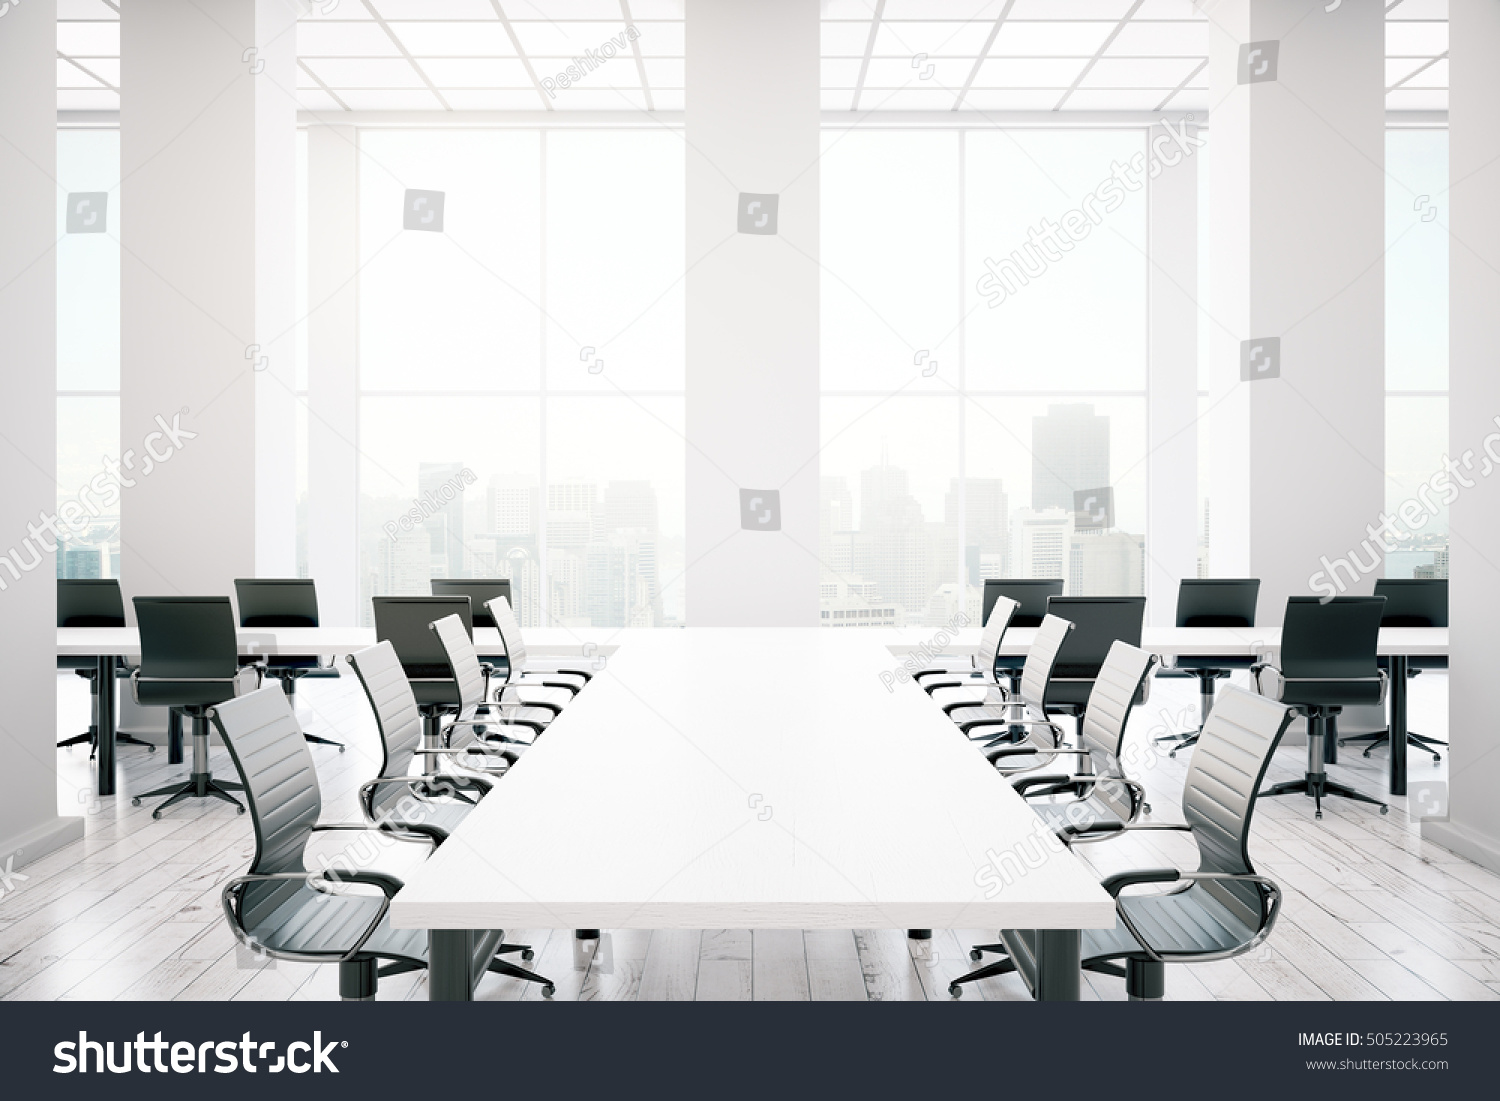 stock-photo-minimalistic-white-conference-room-interior-with-city-view-d-rendering-505223965